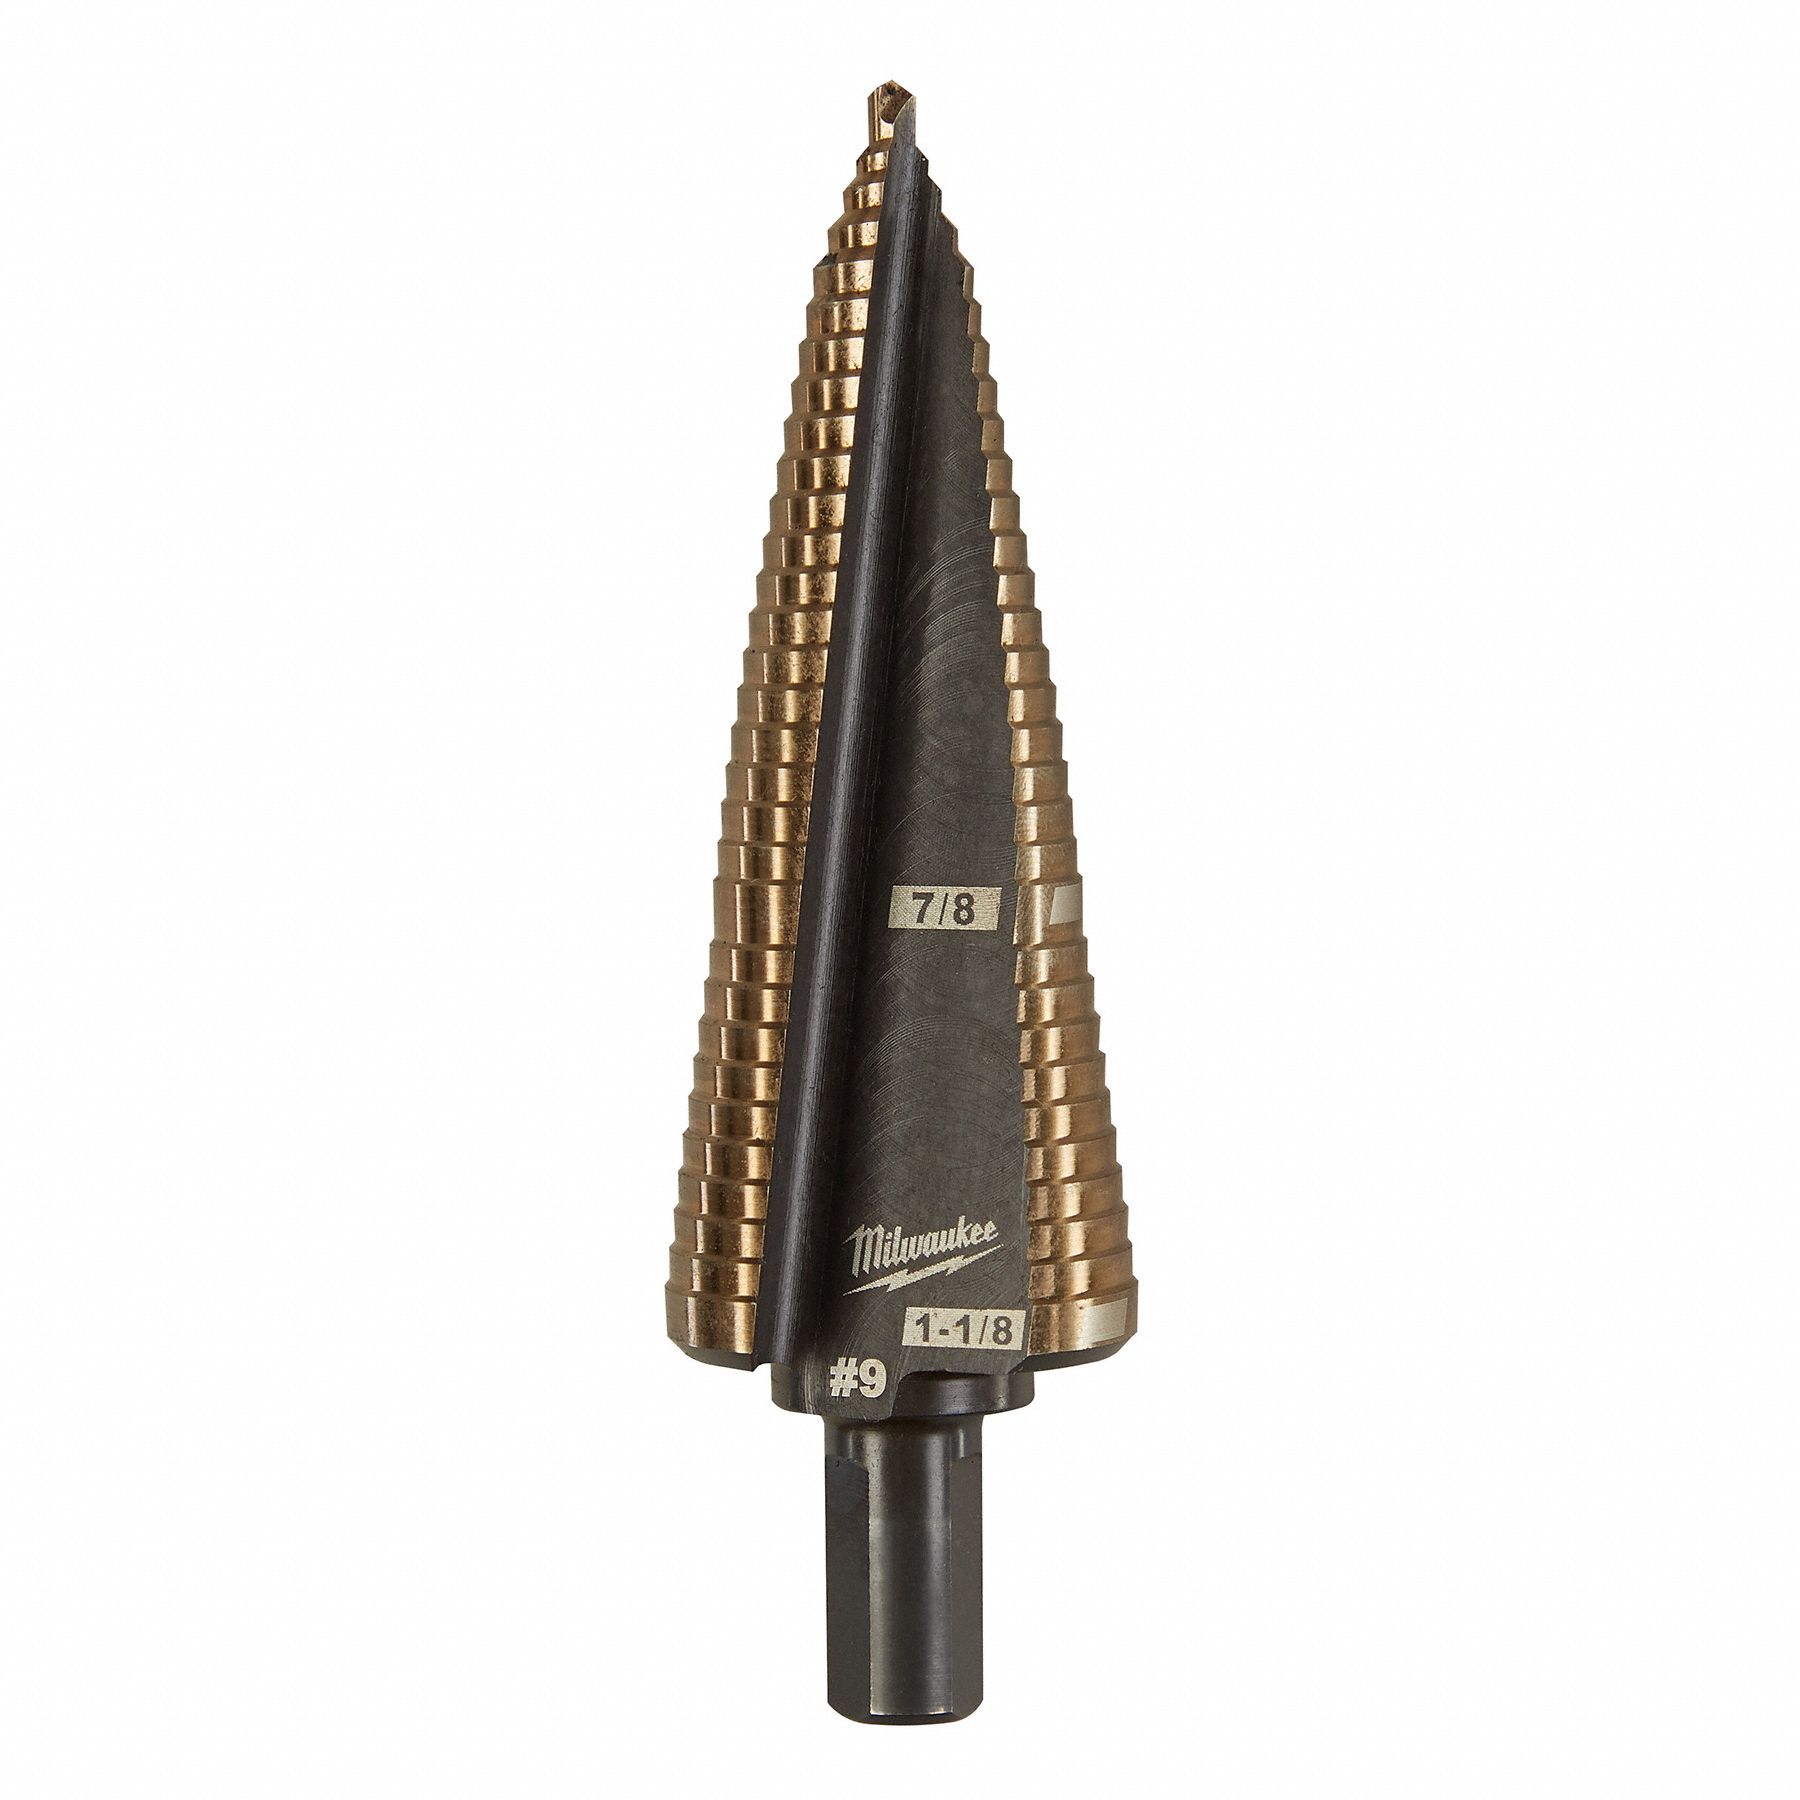 STEP DRILL BIT, 2 HOLE SIZES, ⅞ IN TO 1⅛ IN, ¾ IN STEP INCREMENTS, HEX SHANK, COBALT